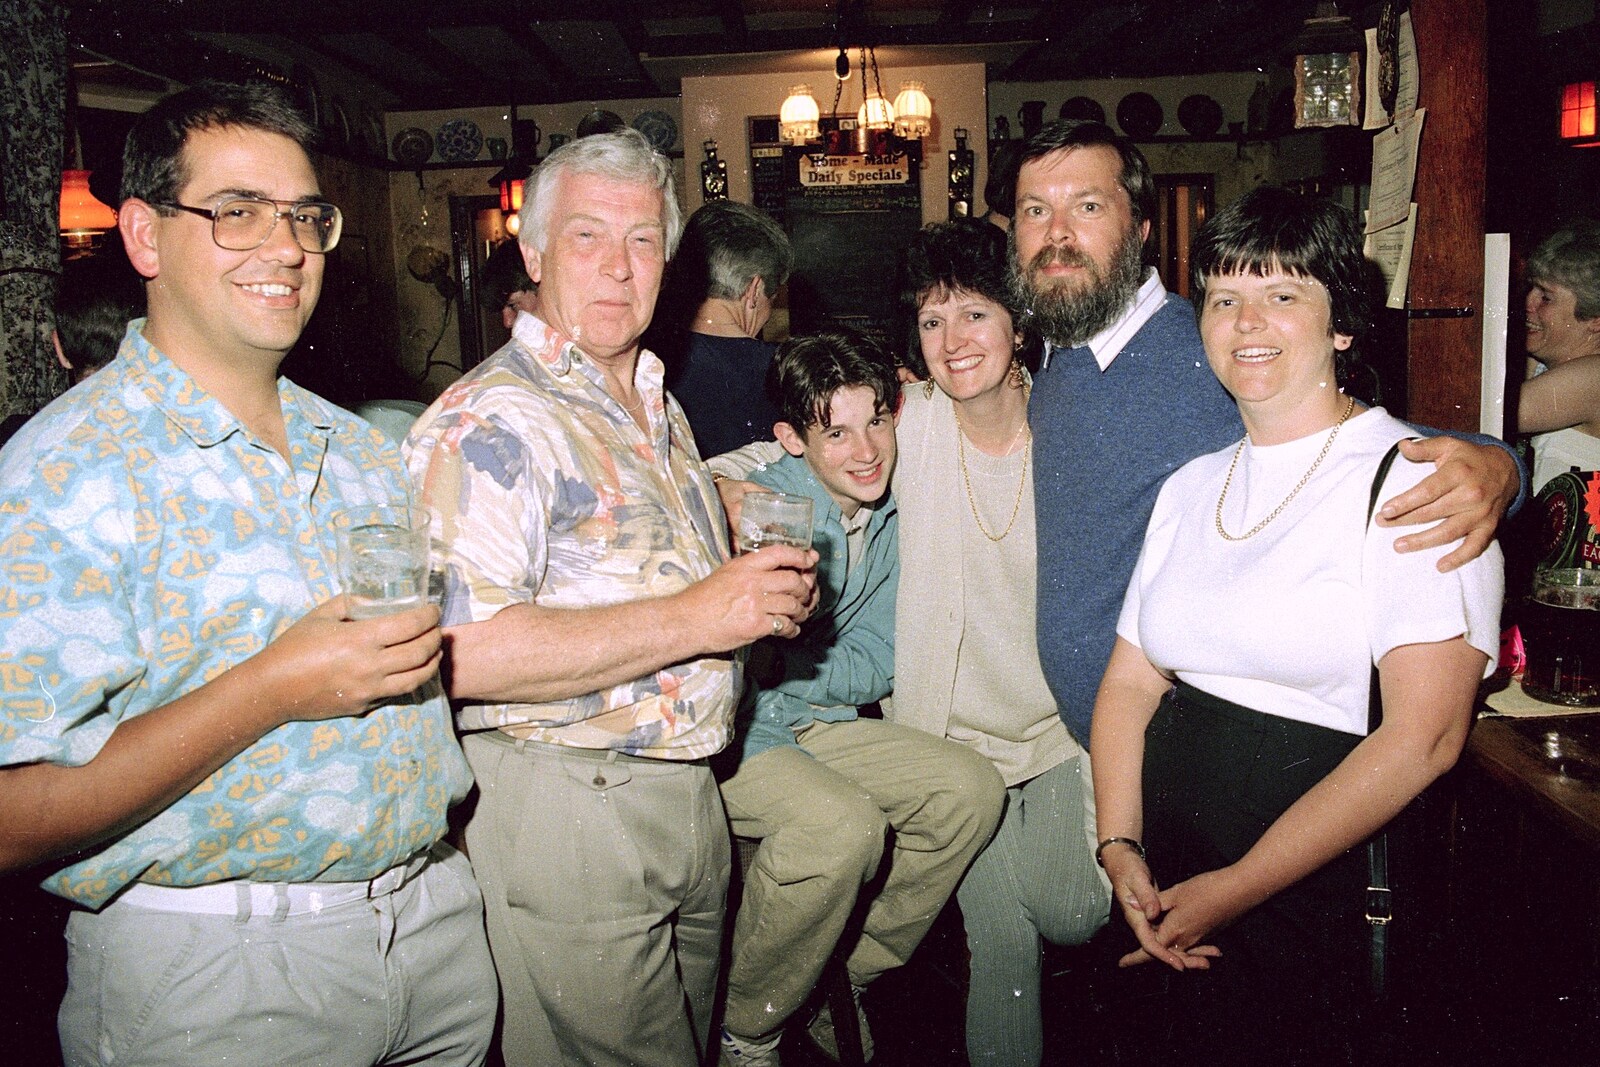 Roger, Colin, James, Jill, Benny and Gloria from Claire's Eighteenth Birthday, The Swan Inn, Brome, Suffolk - 11th June 1994